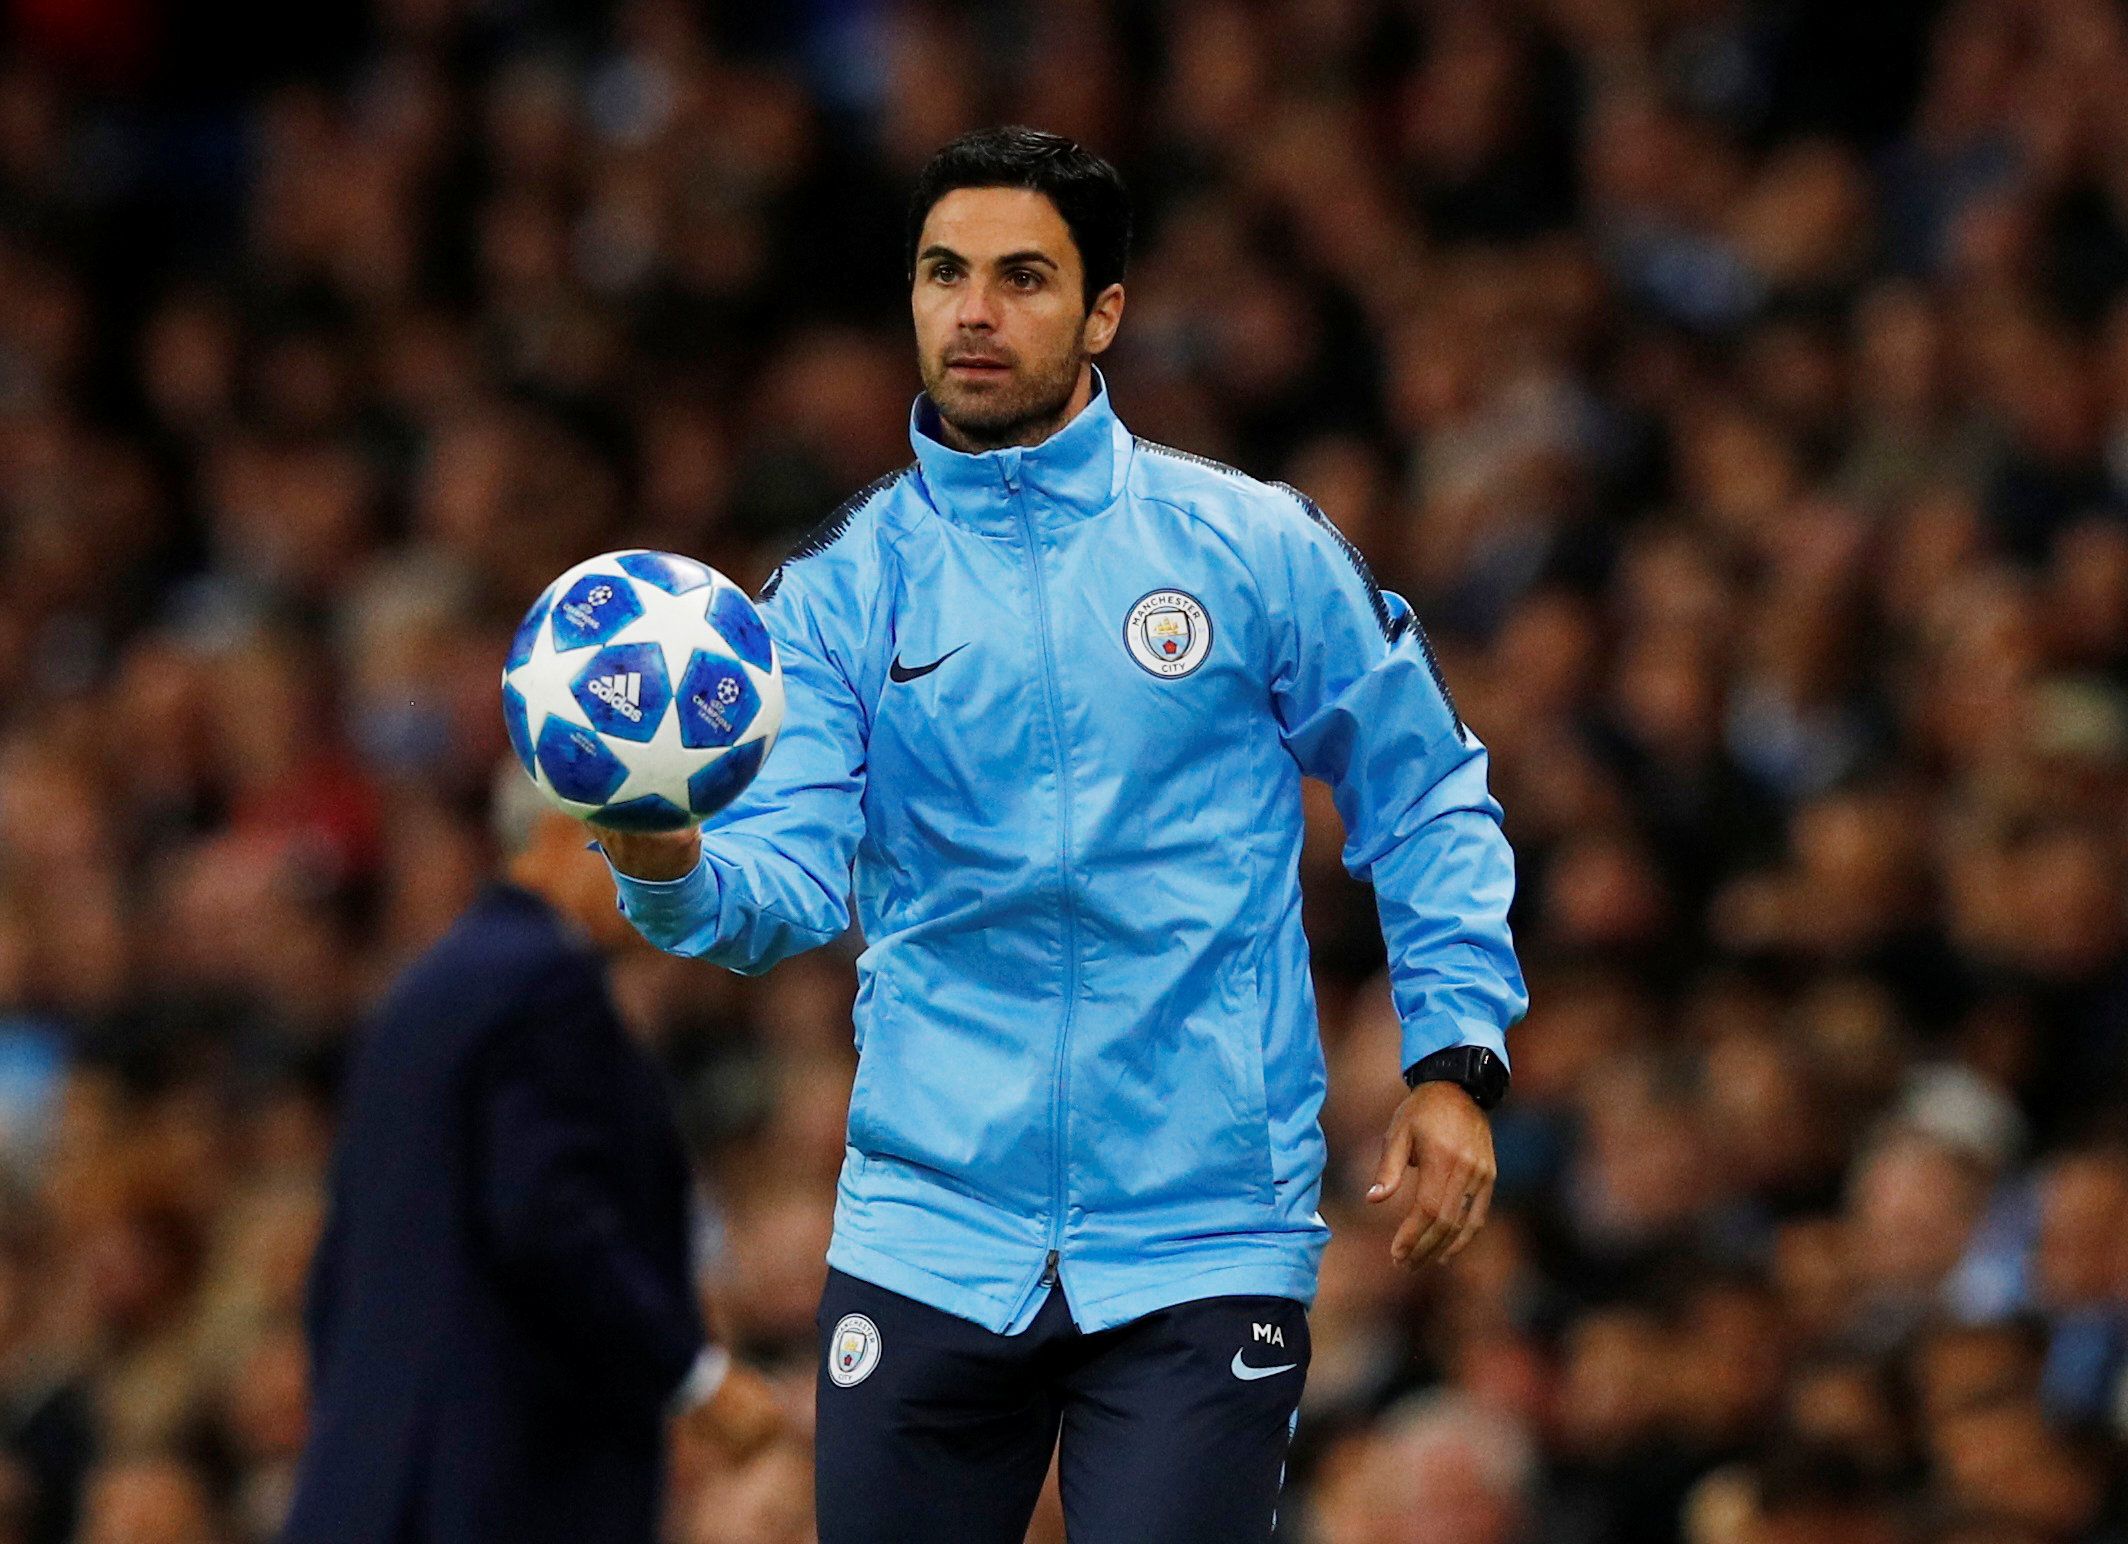 Soccer Football - Champions League - Group Stage - Group F - Manchester City v Olympique Lyonnais - Etihad Stadium, Manchester, Britain - September 19, 2018  Manchester City co assistant coach Mikel Arteta gathers the ball during the match  REUTERS/Phil Noble